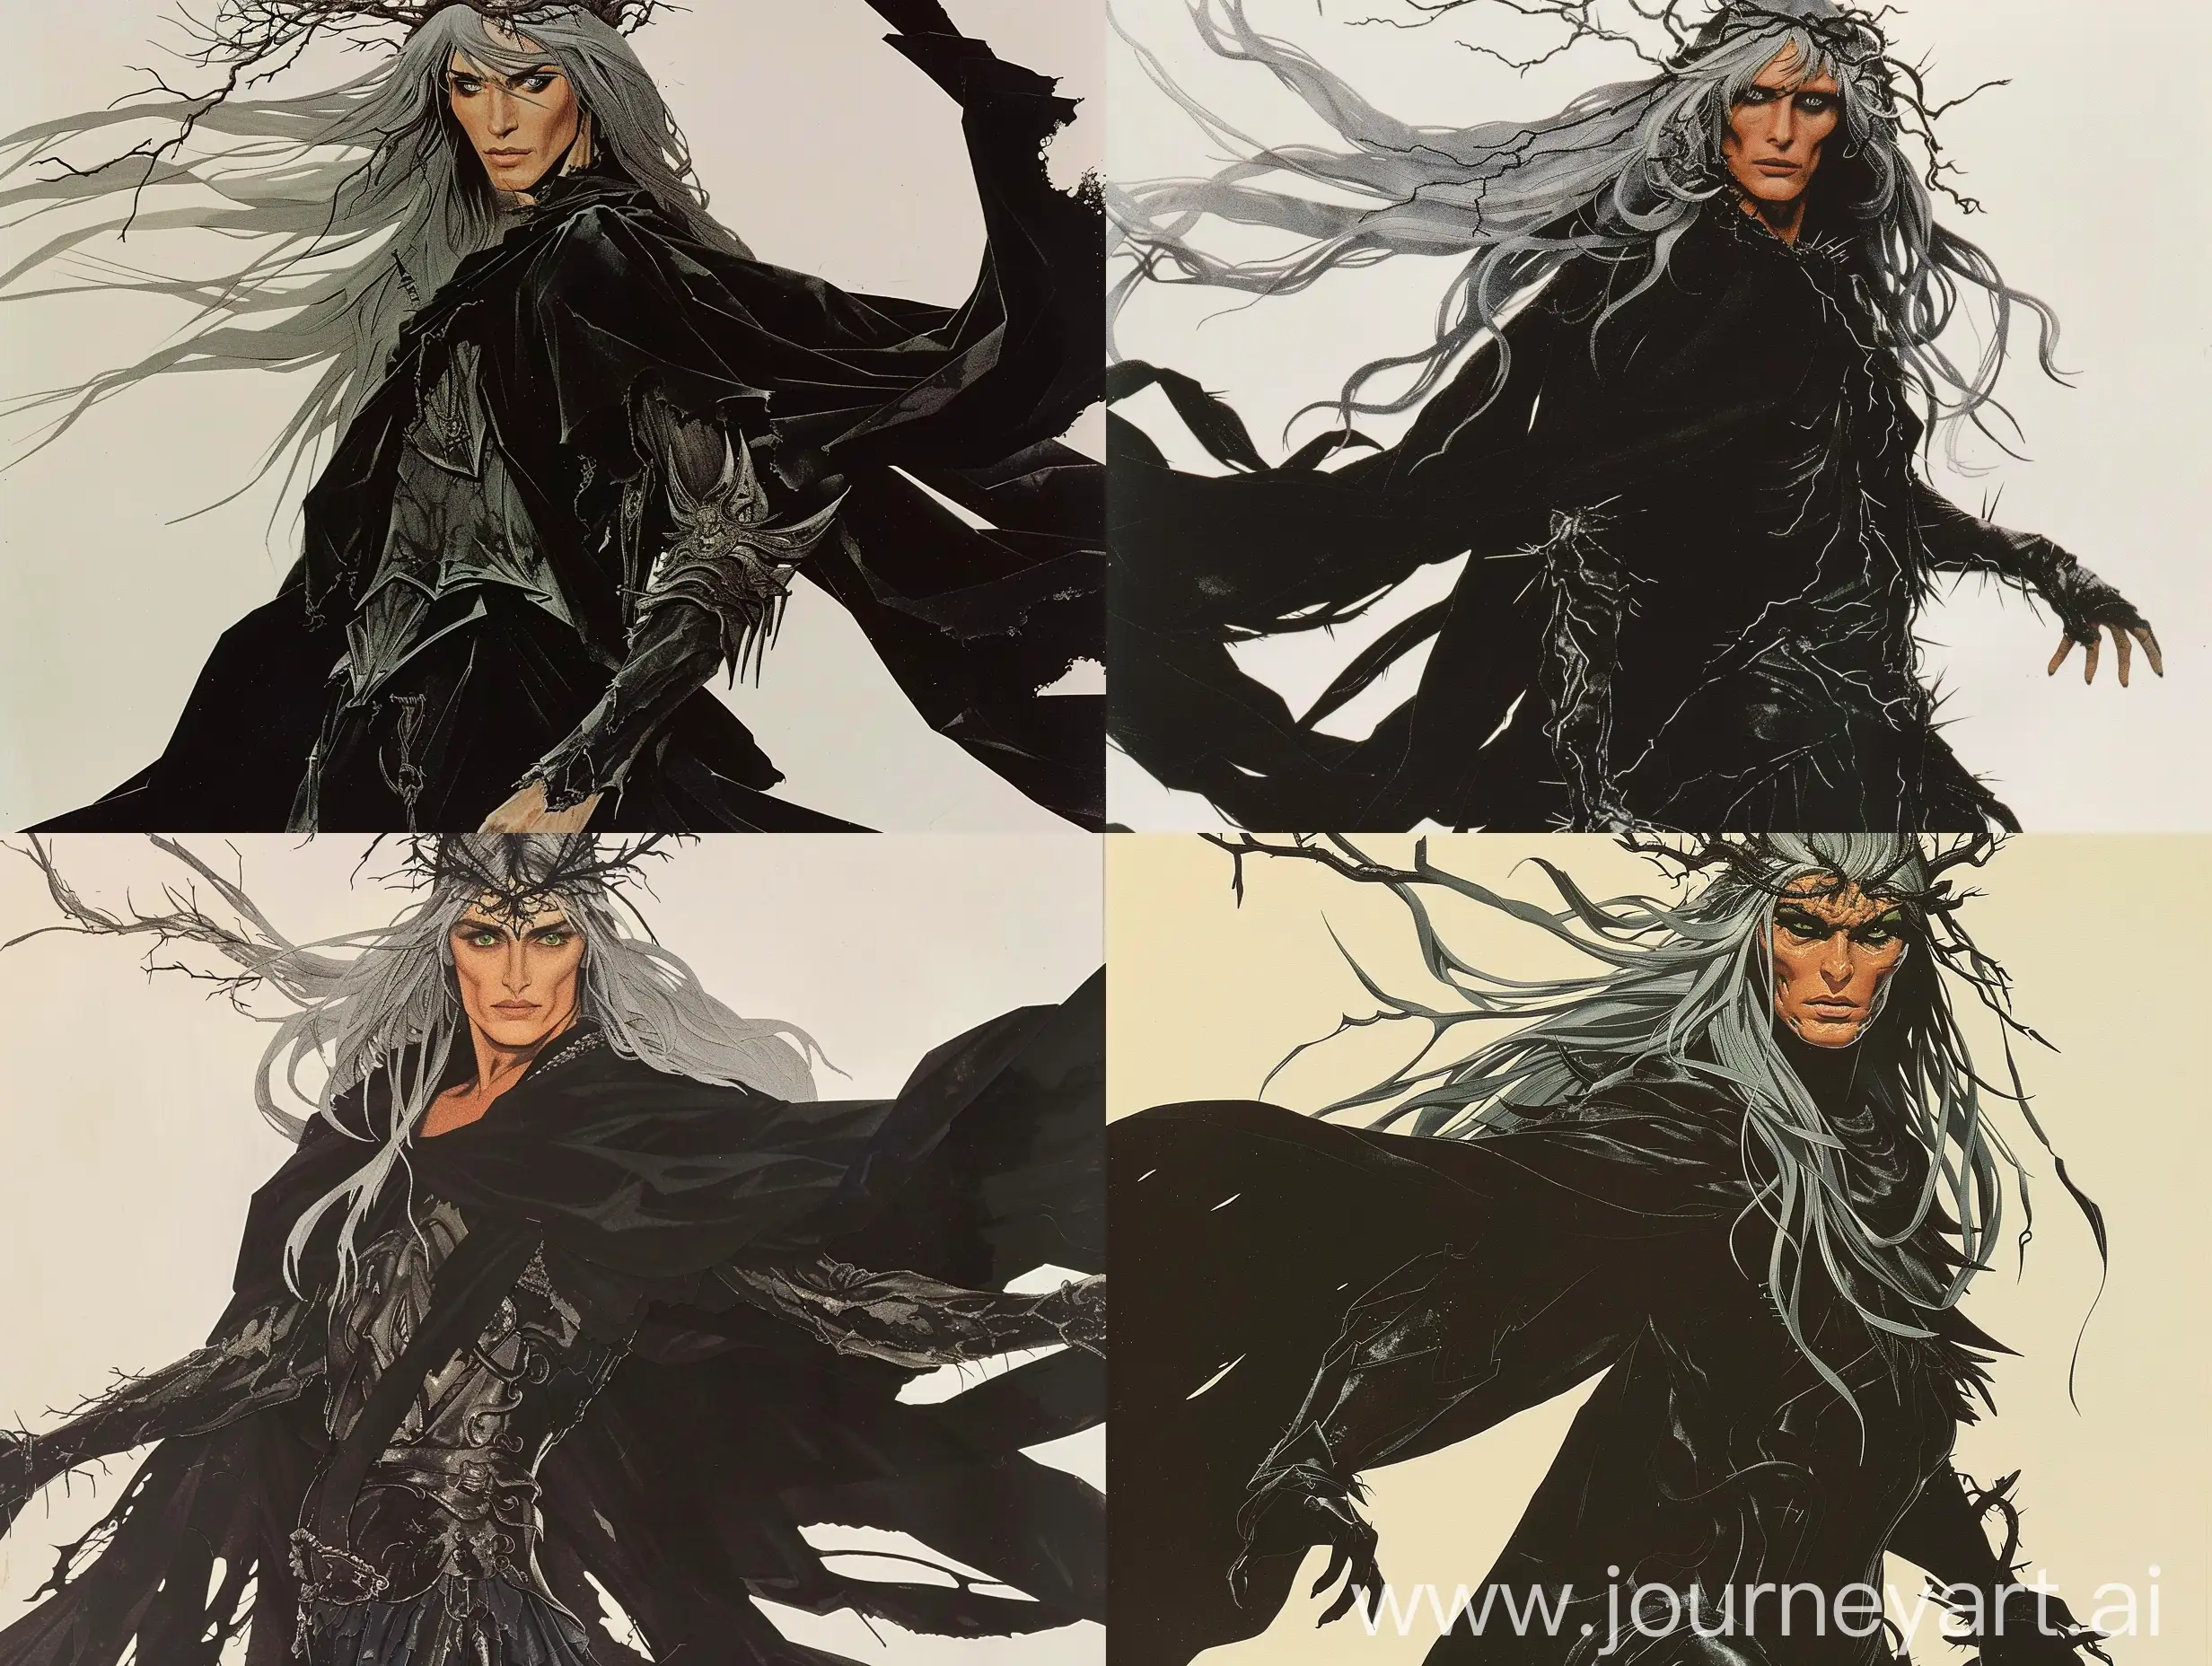 Dark fantasy book cover from the 1970s, paper art, tall, imposing figure, grayish skin with a cadaverous pallor. Long flowing silver hair falls to her waist, moving as if it had a life of its own. Angular face with sharp features, prominent cheekbones over tapered cheekbones. Piercing eyes with irises of a supernatural glazed green. Thick eyebrows arched over her eyes. Thin lips curled into a permanent scowl. Twisted crown of branches and thorns on his head. Faded black velvet royal robes torn and tattered. Worn black armor with thorn-shaped details on the shoulders and forearms. A flowing black cape swirled around his legs.